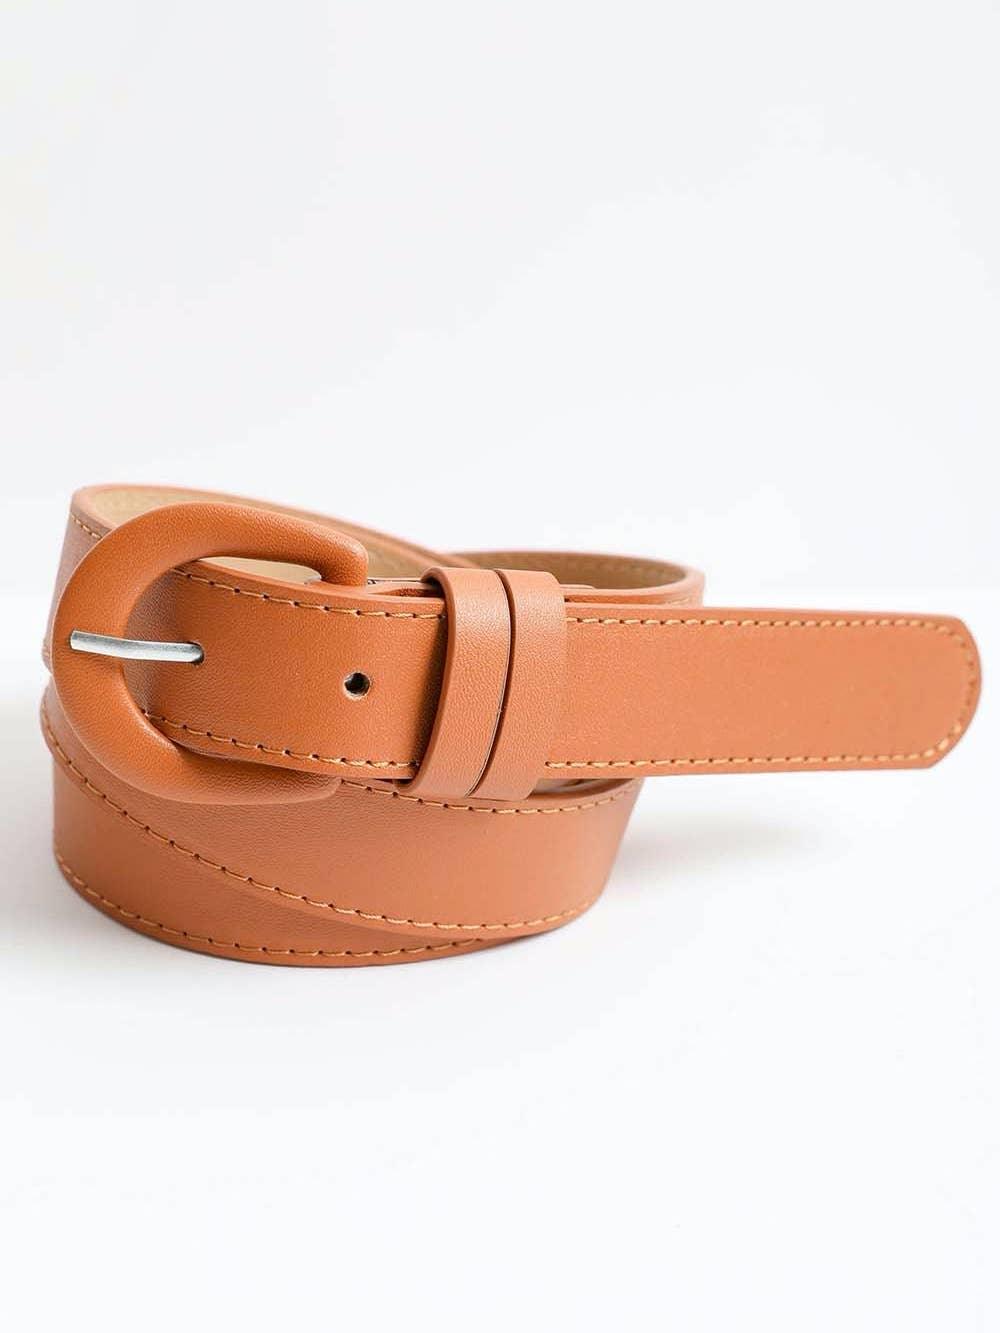 Classic Leather Belt in Cognac - Classic Leather Belt in Cognac - undefined - Salt and Honey